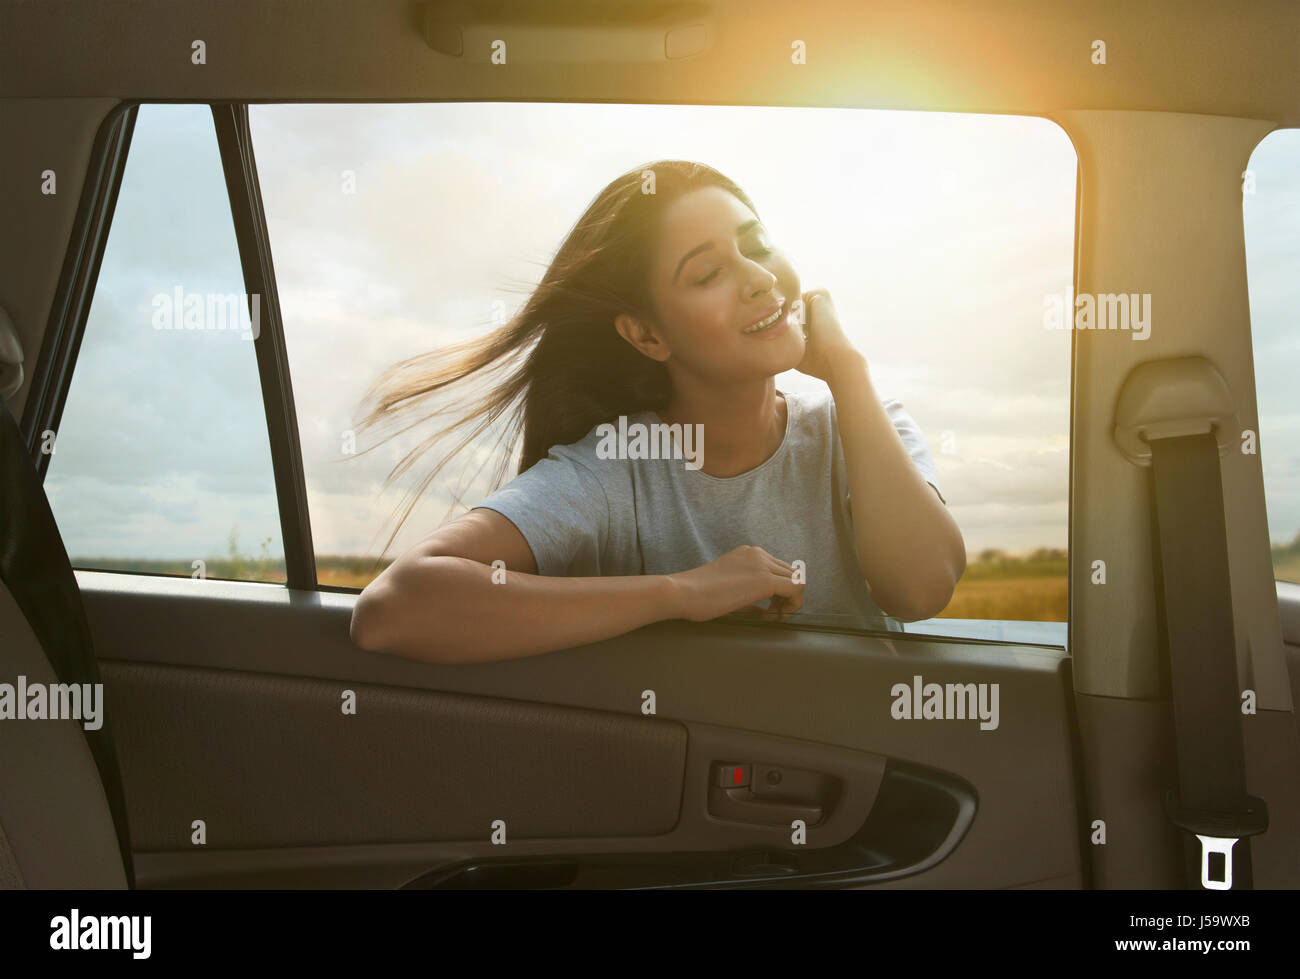 Young woman with windblown hair enjoying sun outside of car Stock Photo